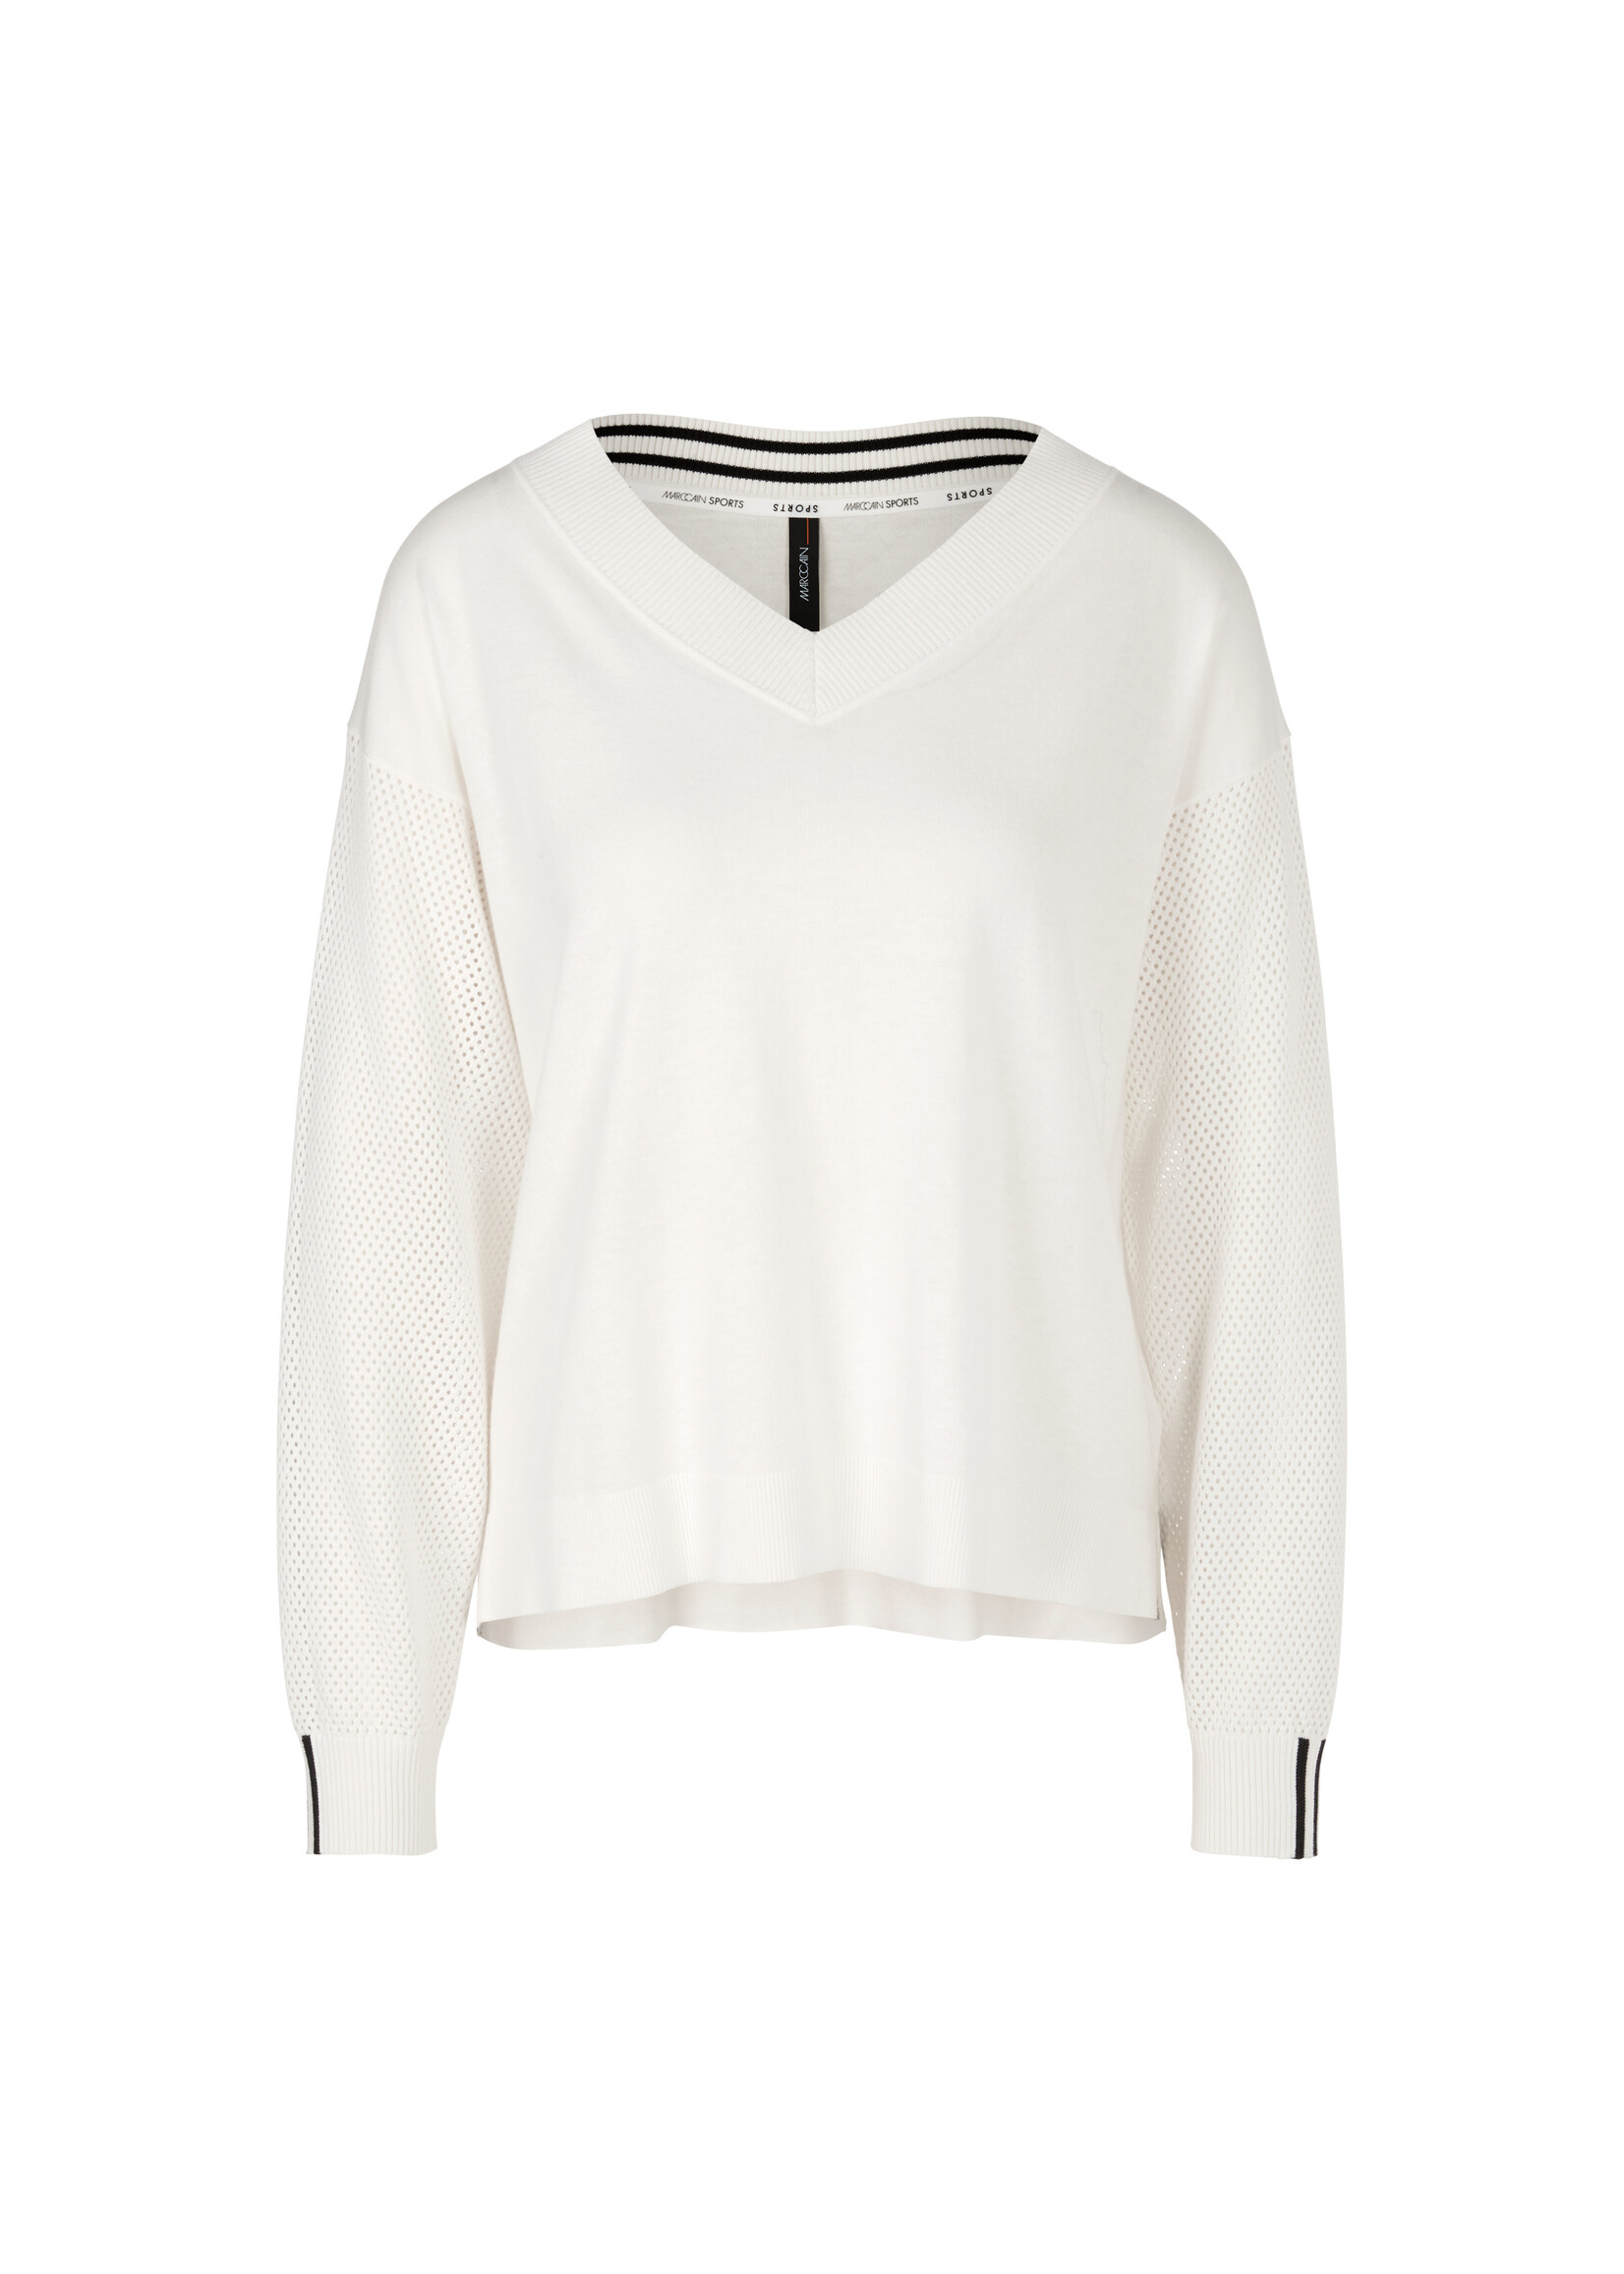 Marccain Sports Sweater WS 41.11 M71 110